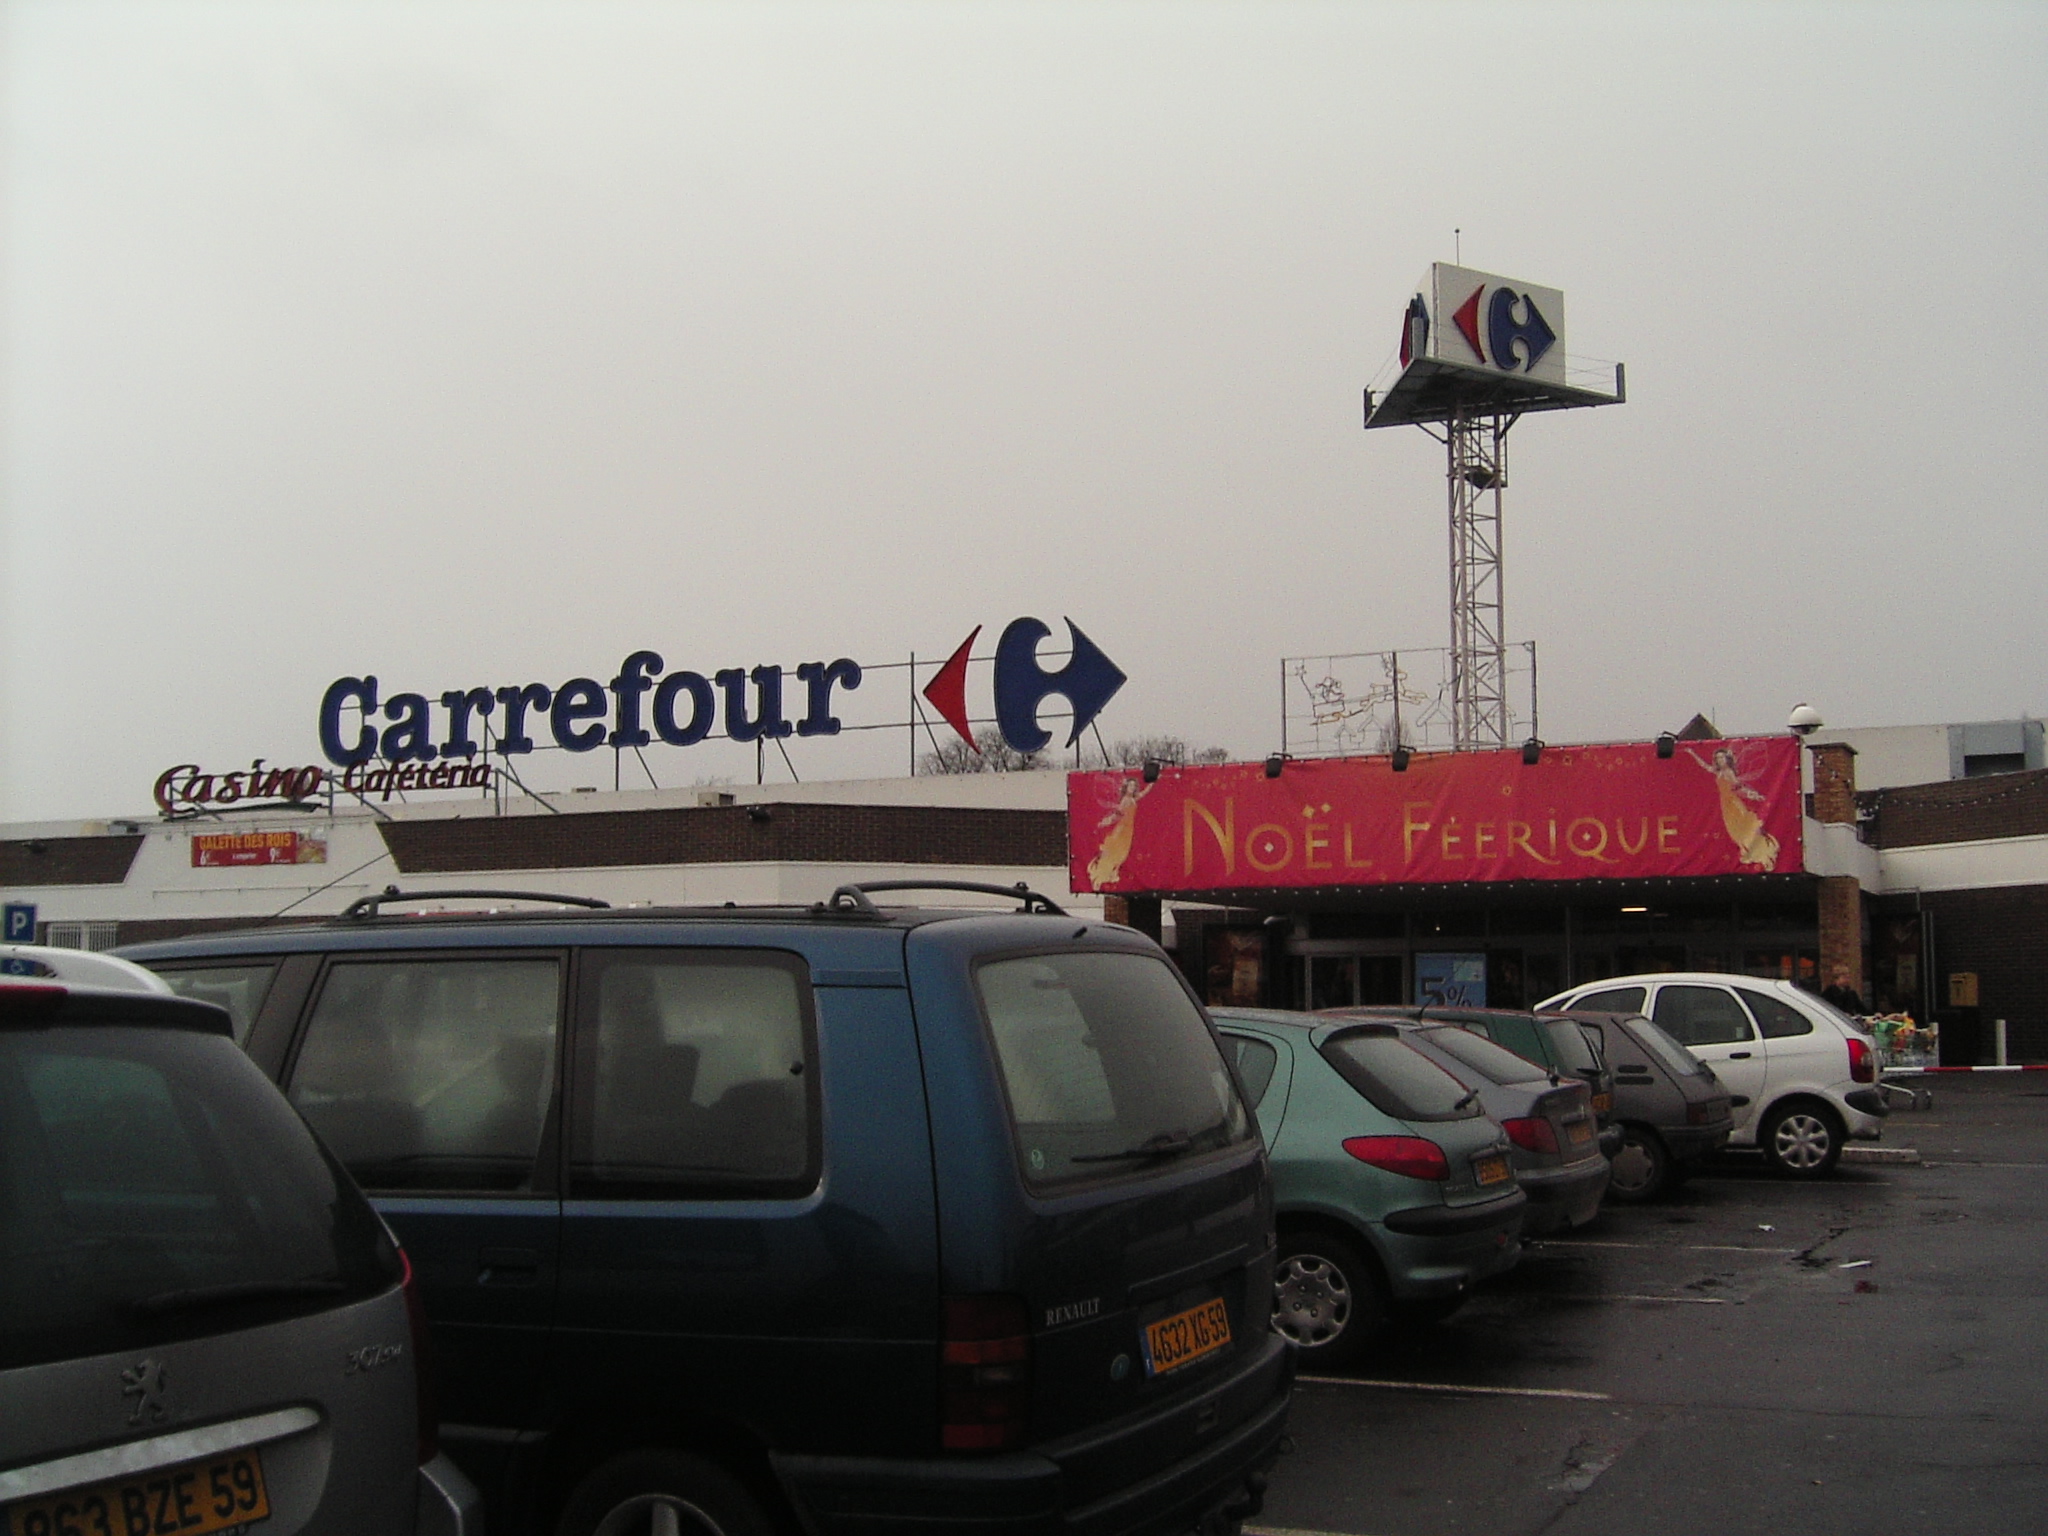 Retailers in France, hypermarket Carrefour